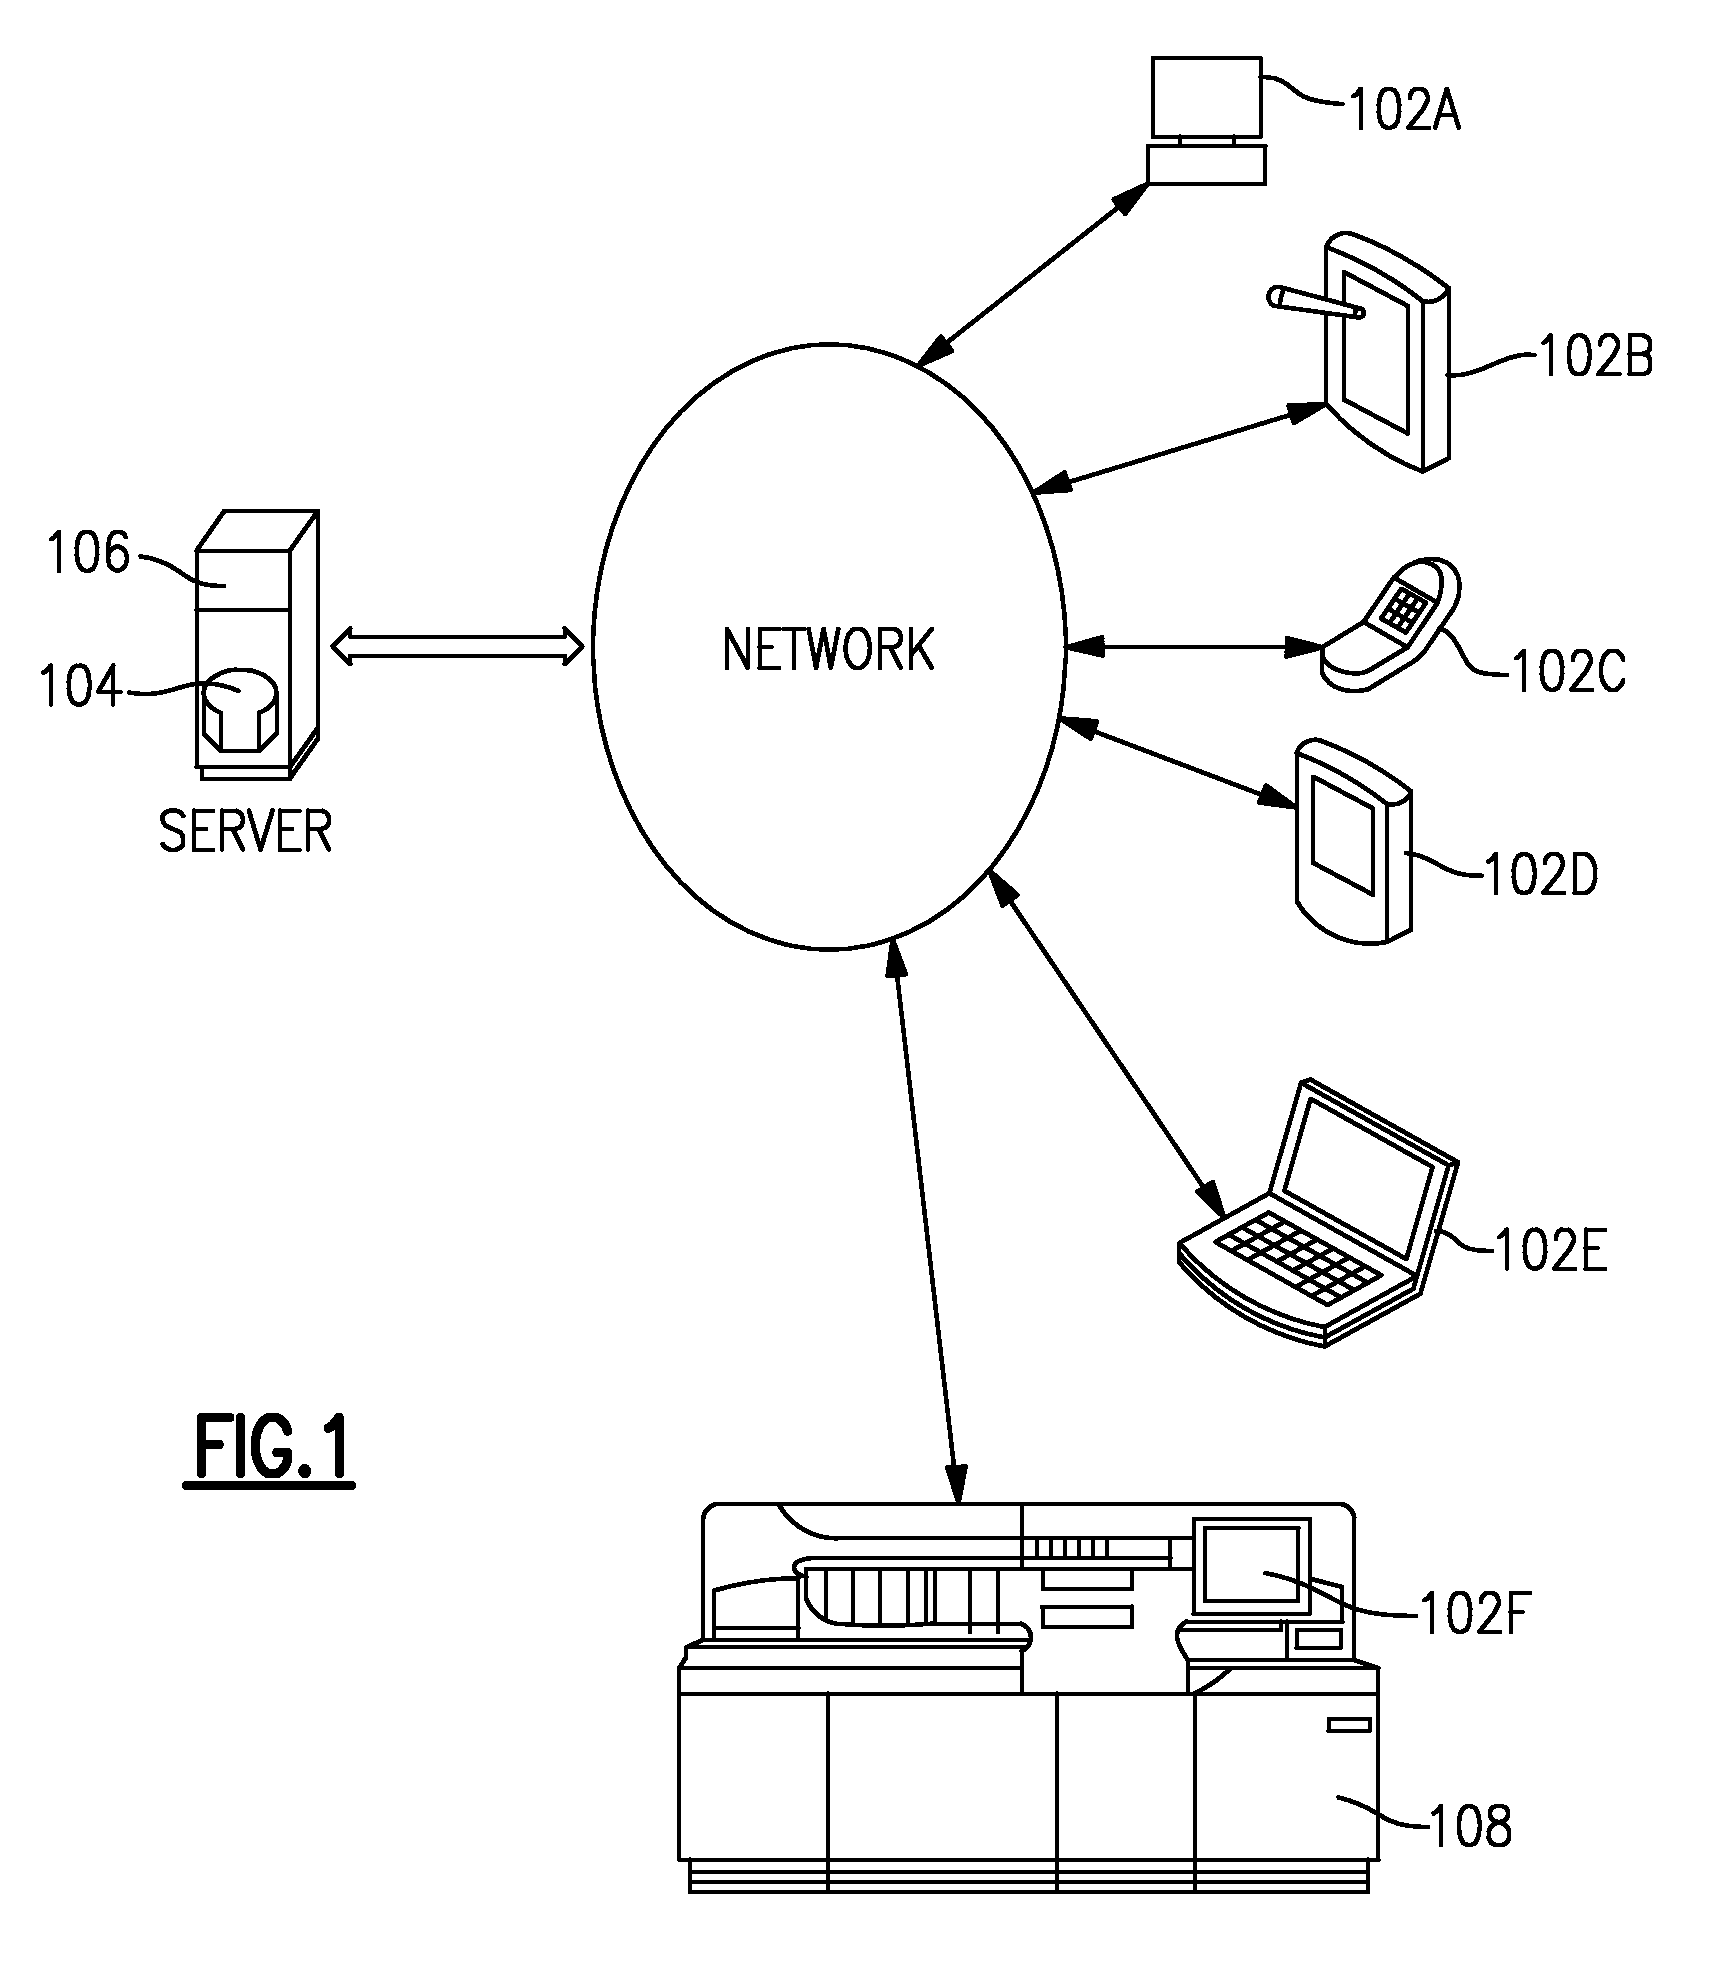 System and method of inventory management